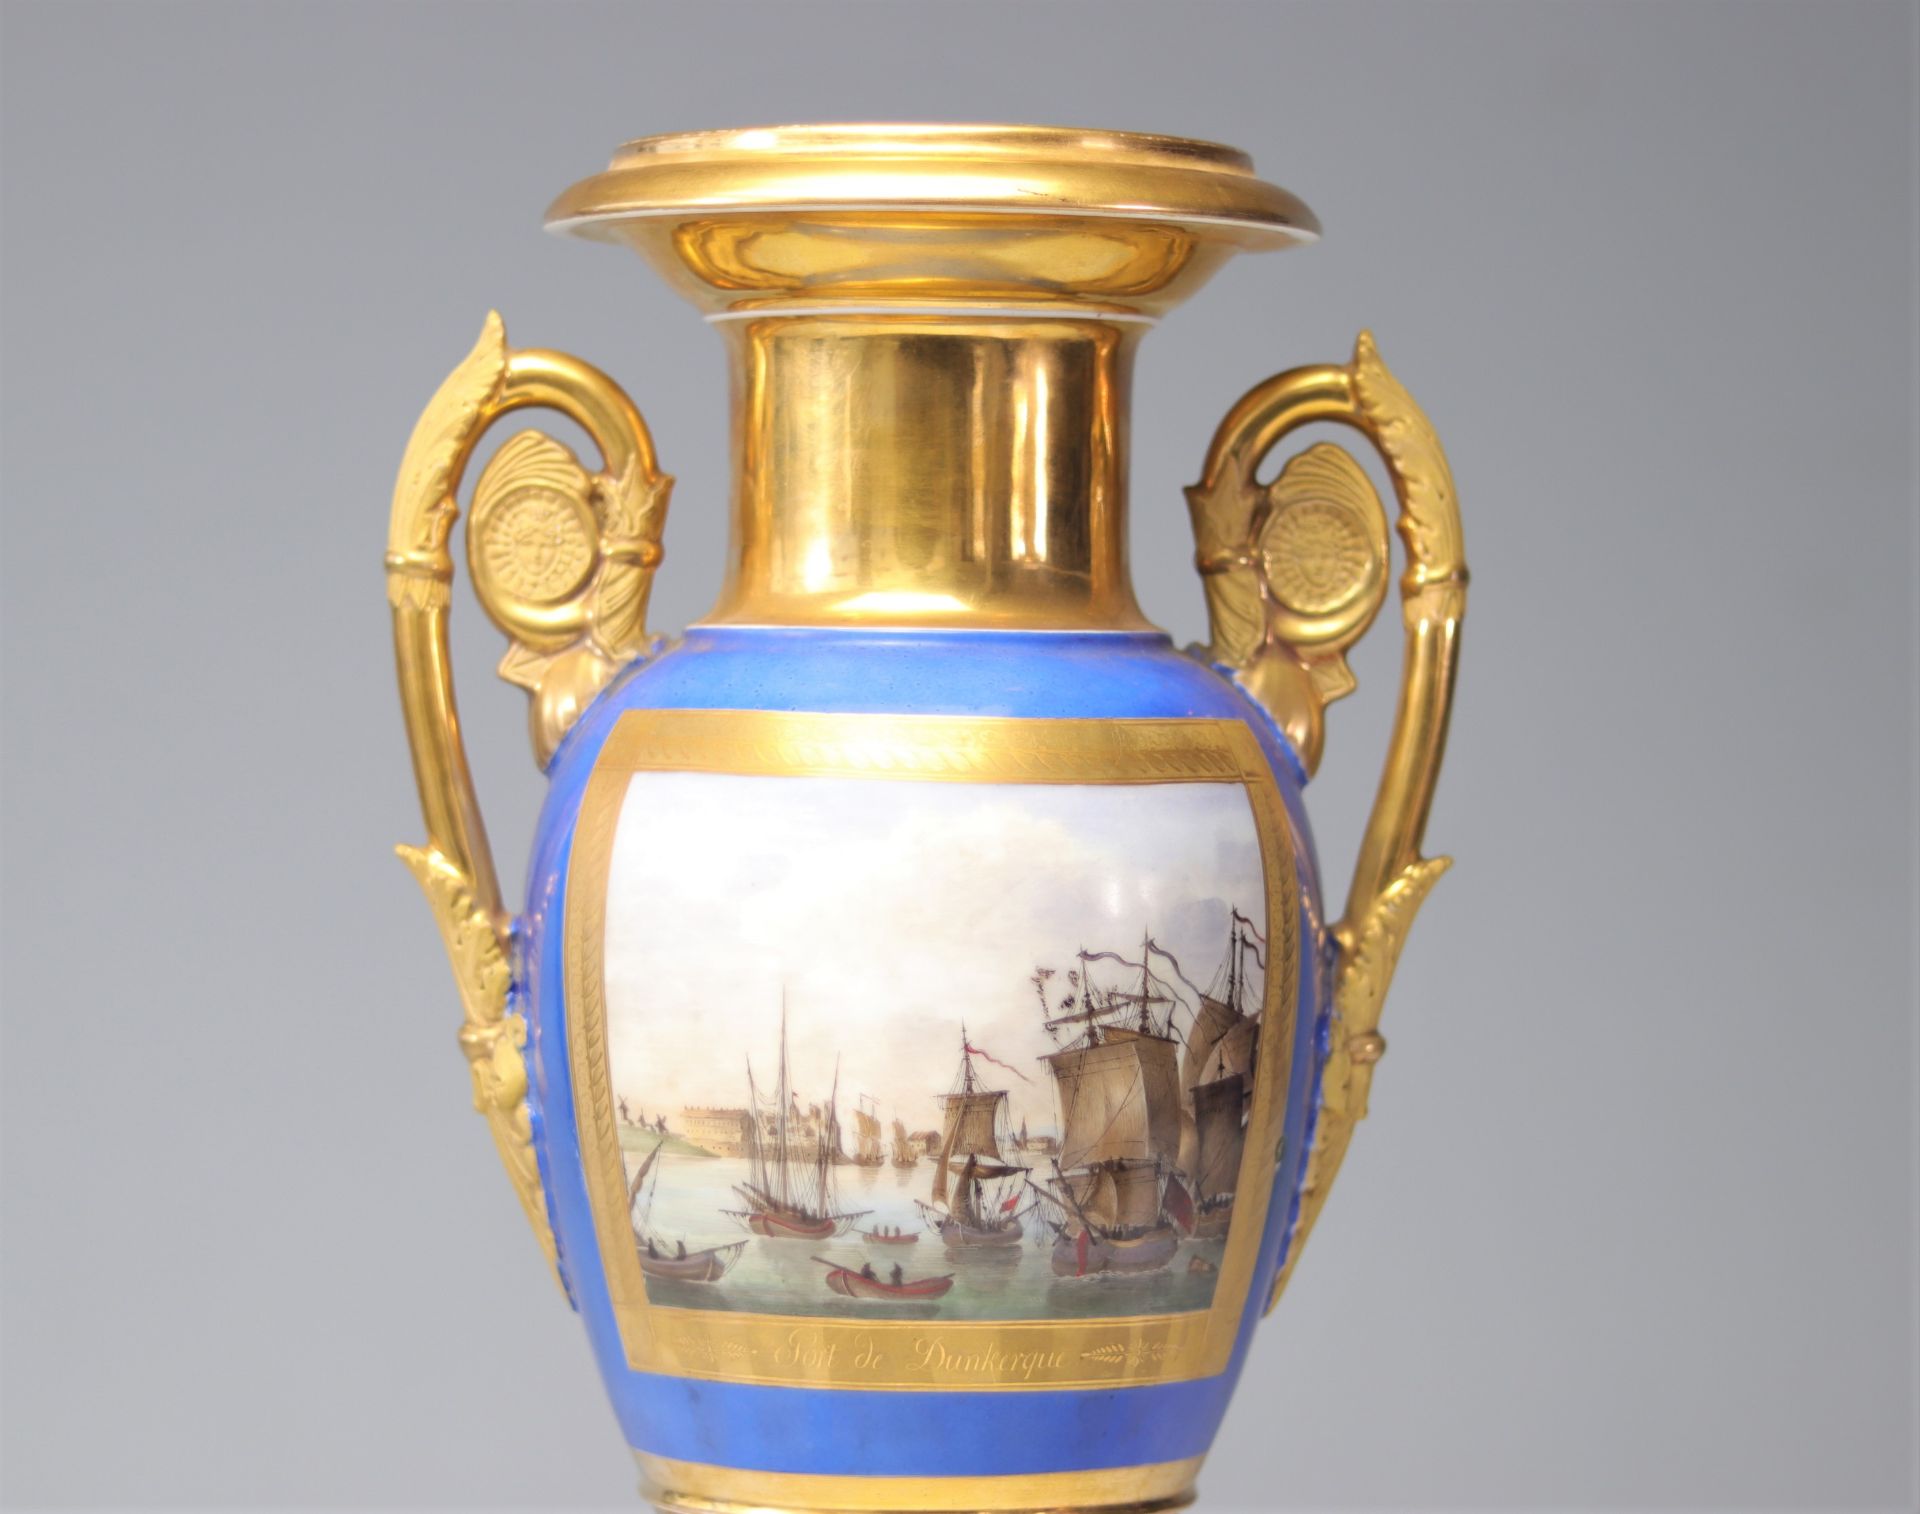 Pair of Empire period vases with port scenes "Port Louis and Dunkirk" - Image 4 of 5